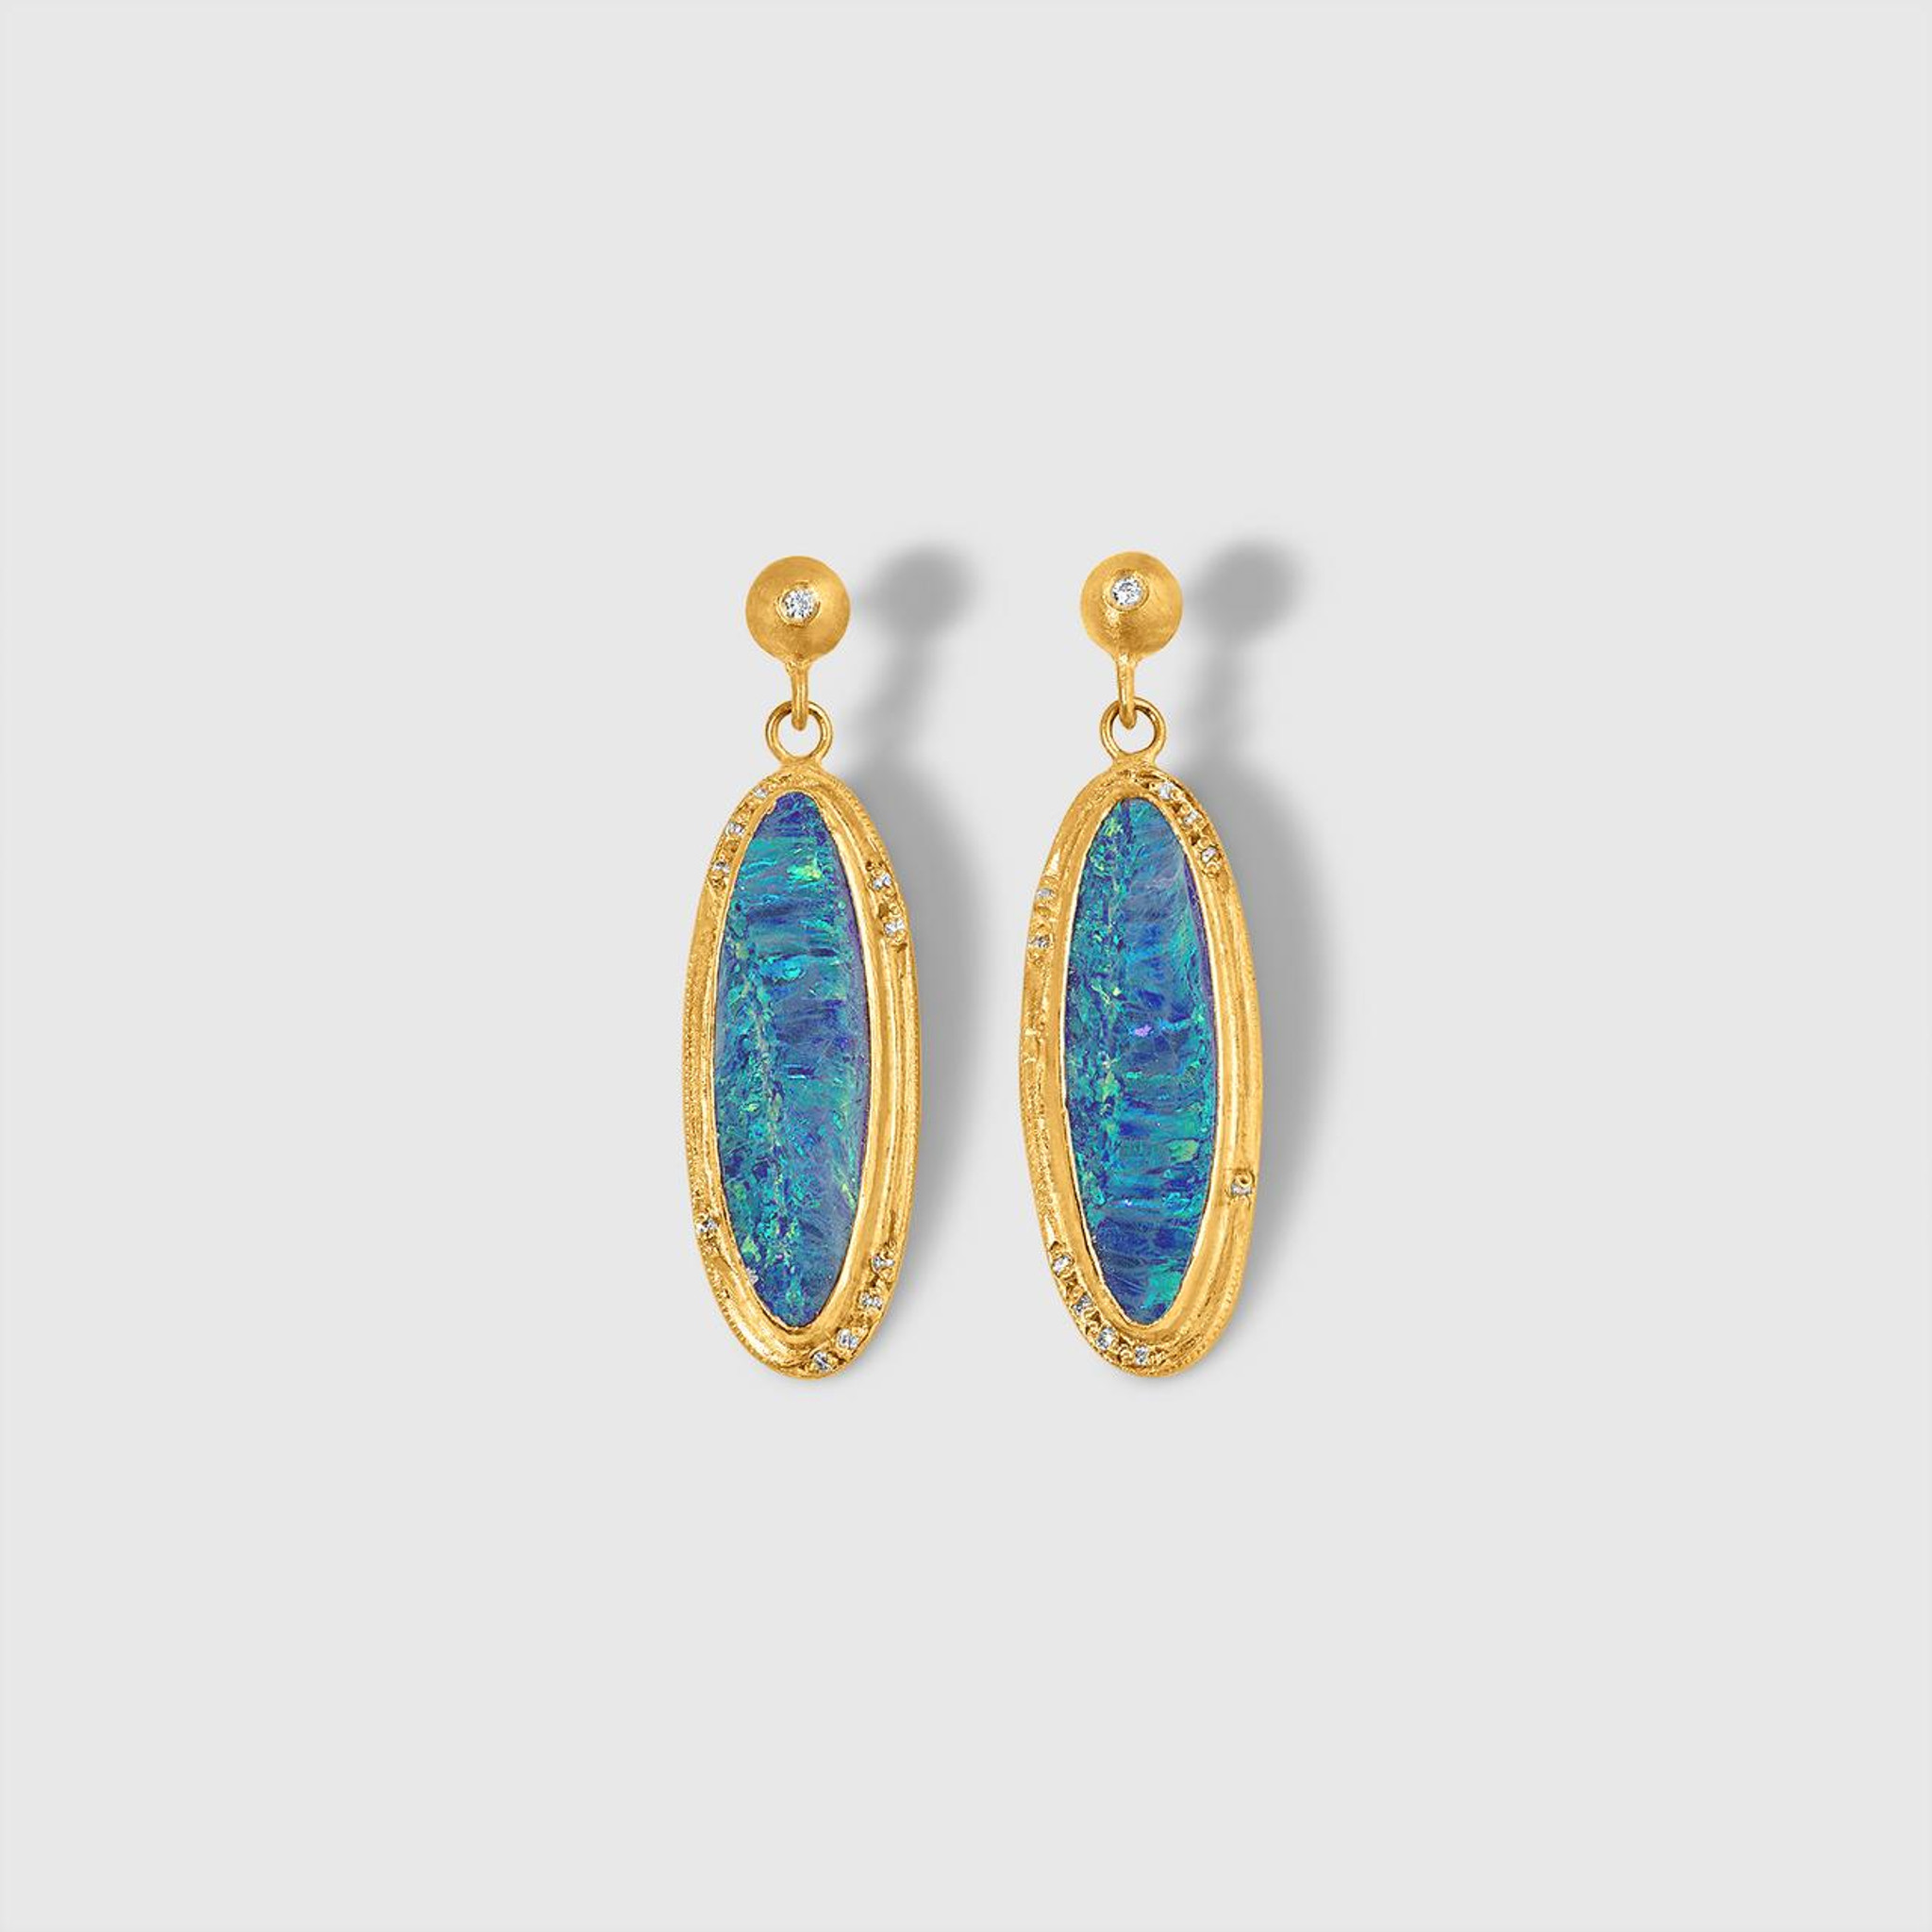 Kurtulan Long, Oval Doublet Opal Post Earrings with Diamonds, 24kt Solid Yellow Gold 